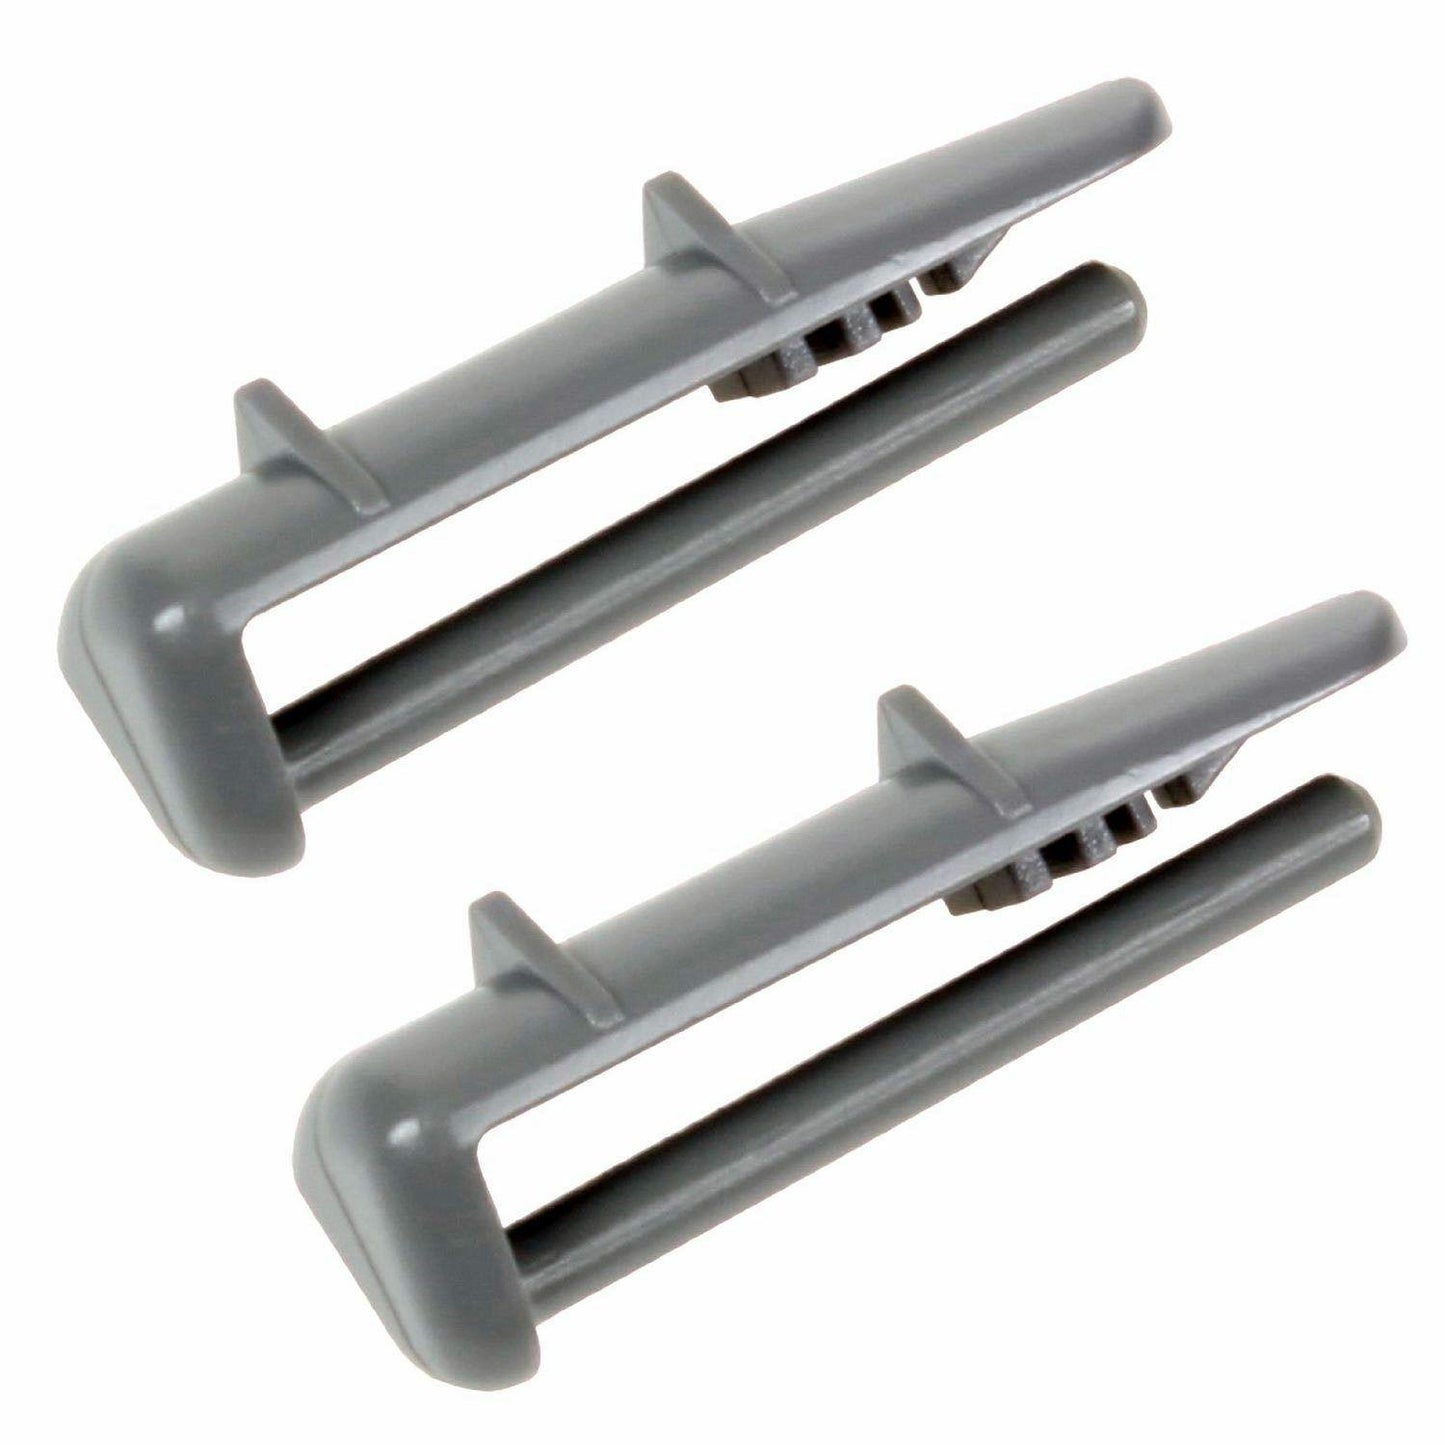 2x Dishwasher Rear Rail Stop Cap For Blanco BFD8W BFD8P BFD8XP BFD8 Sparesbarn